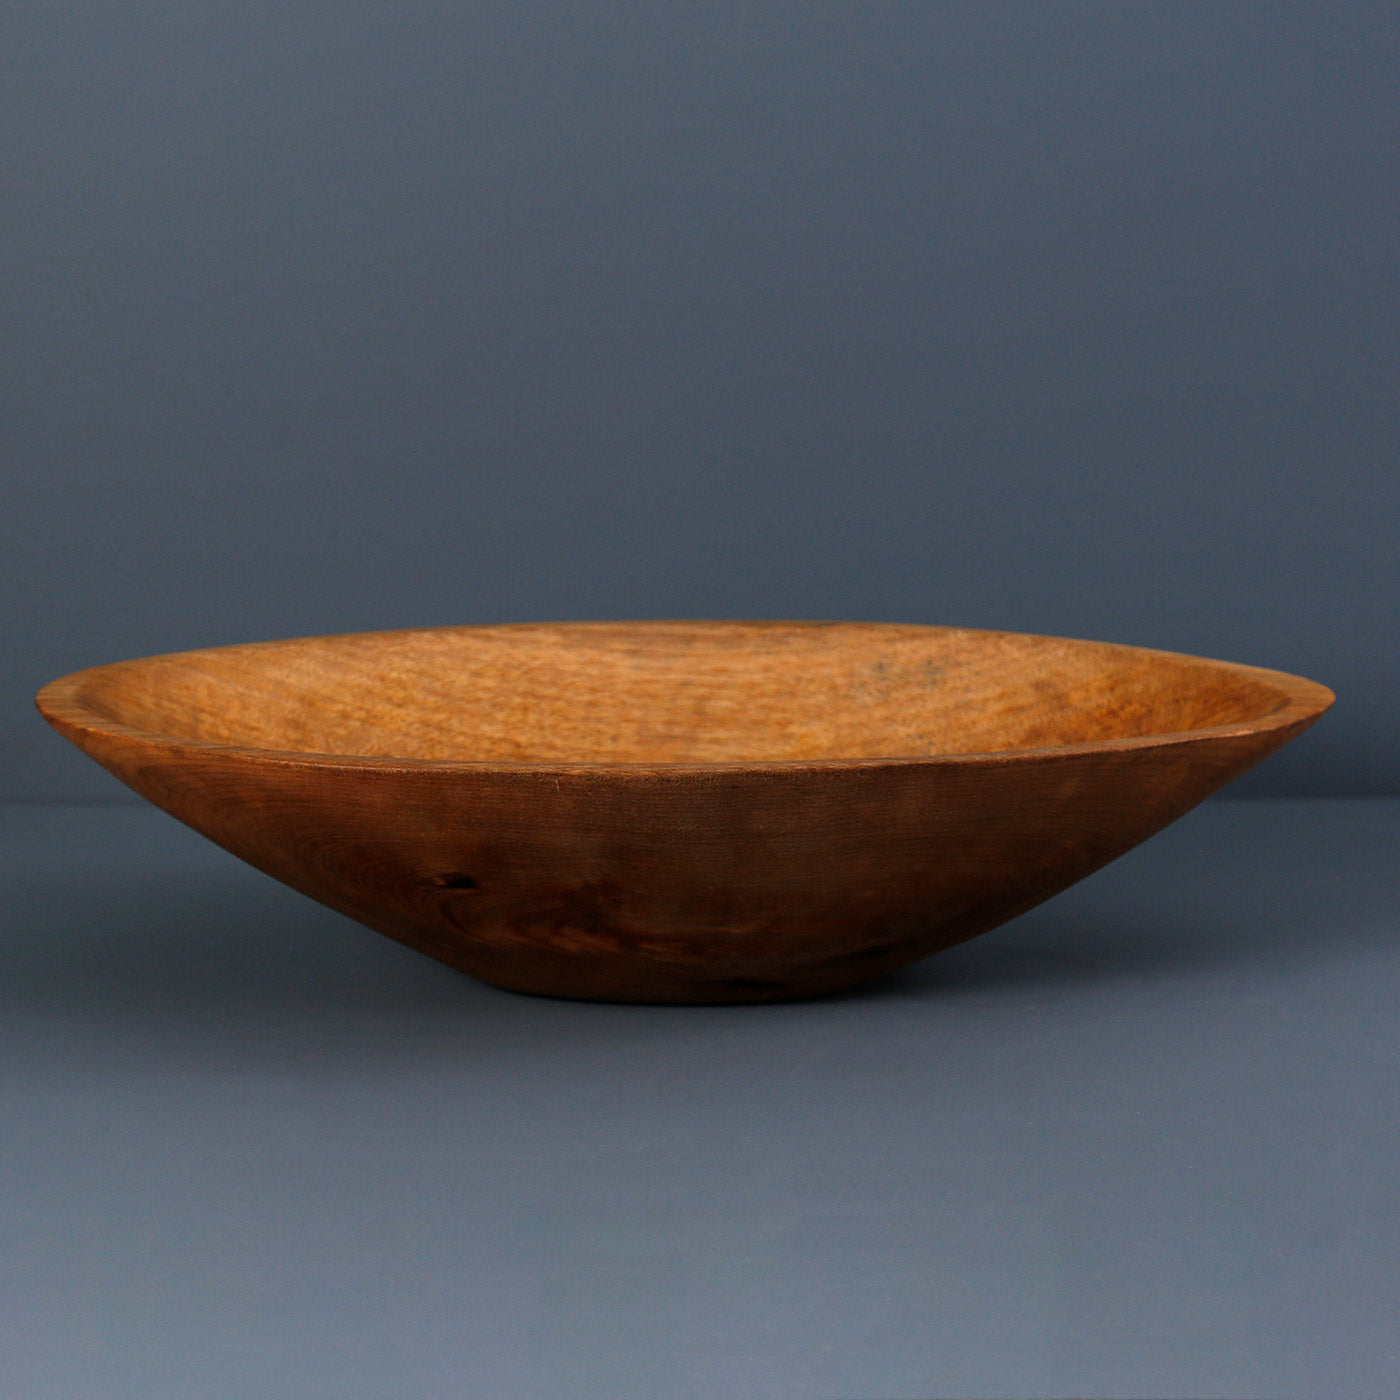 Creating Comfort Lab Hand-Carved Extra-Large Wooden Bowl, Walnut